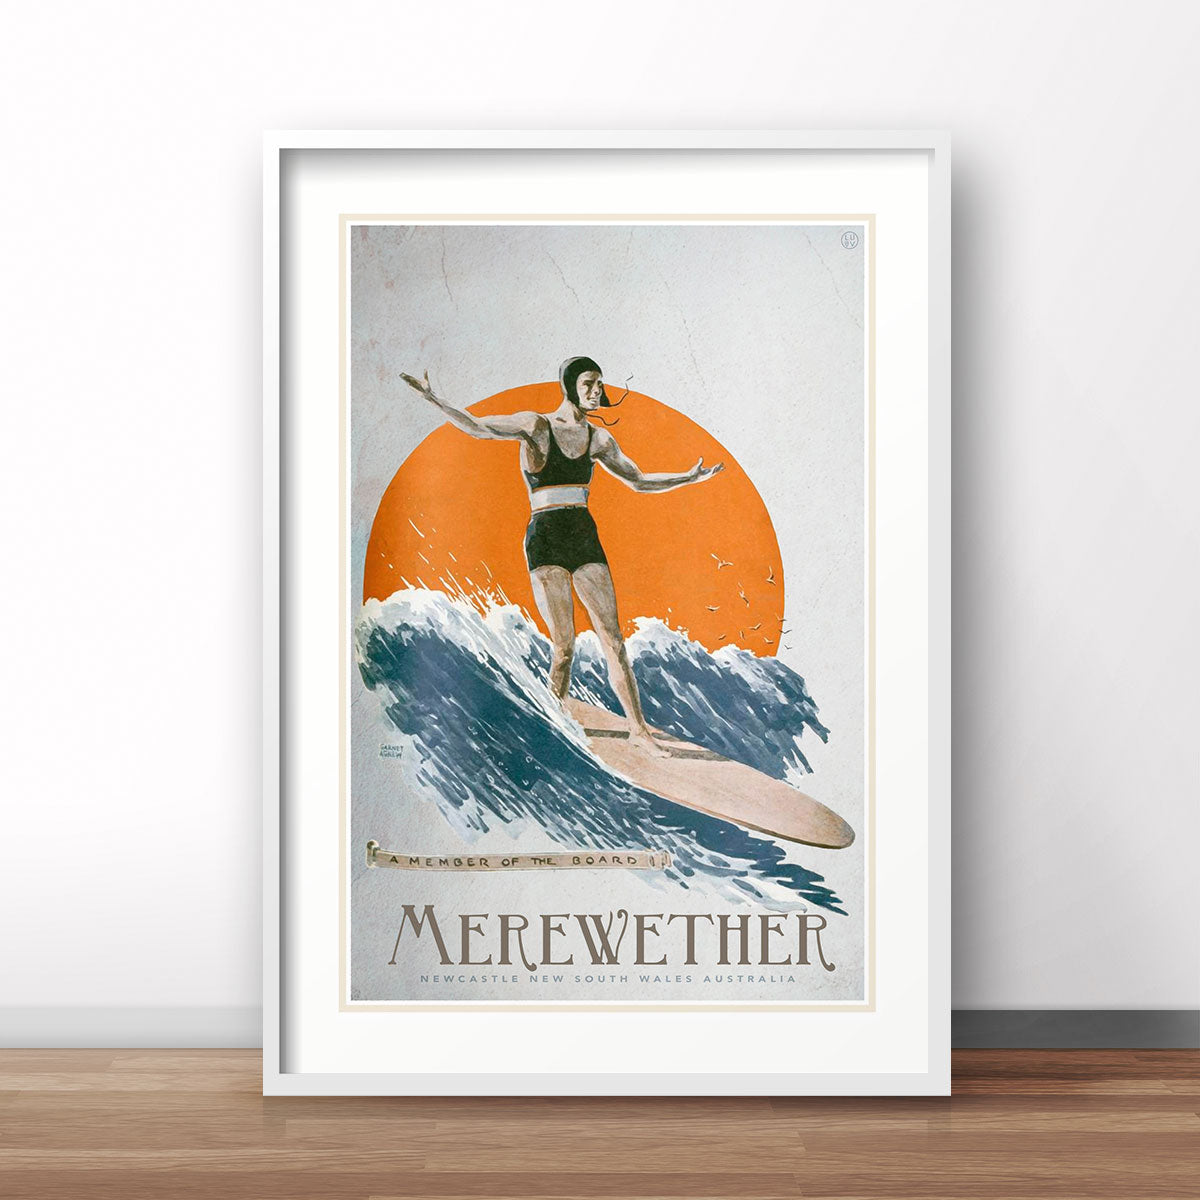 Merewether retro vintage surfer poster print from Places We Luv